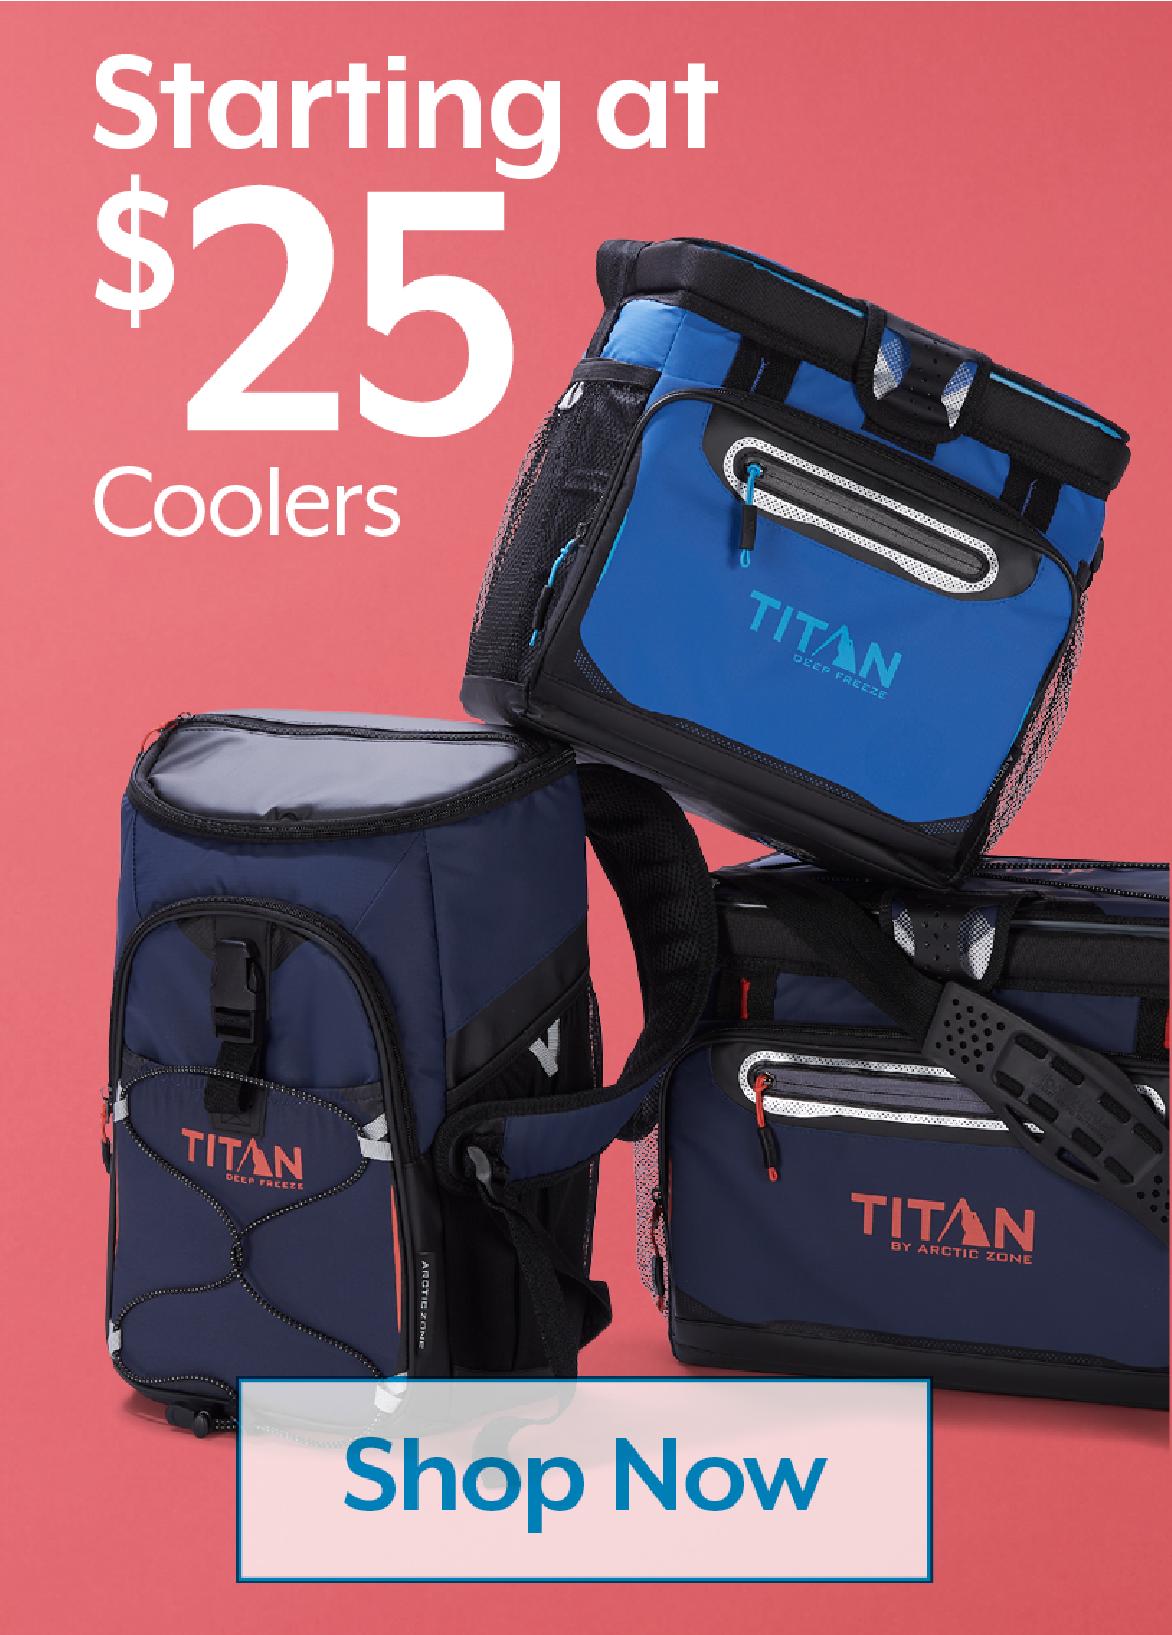 STARTING AT $25 Coolers